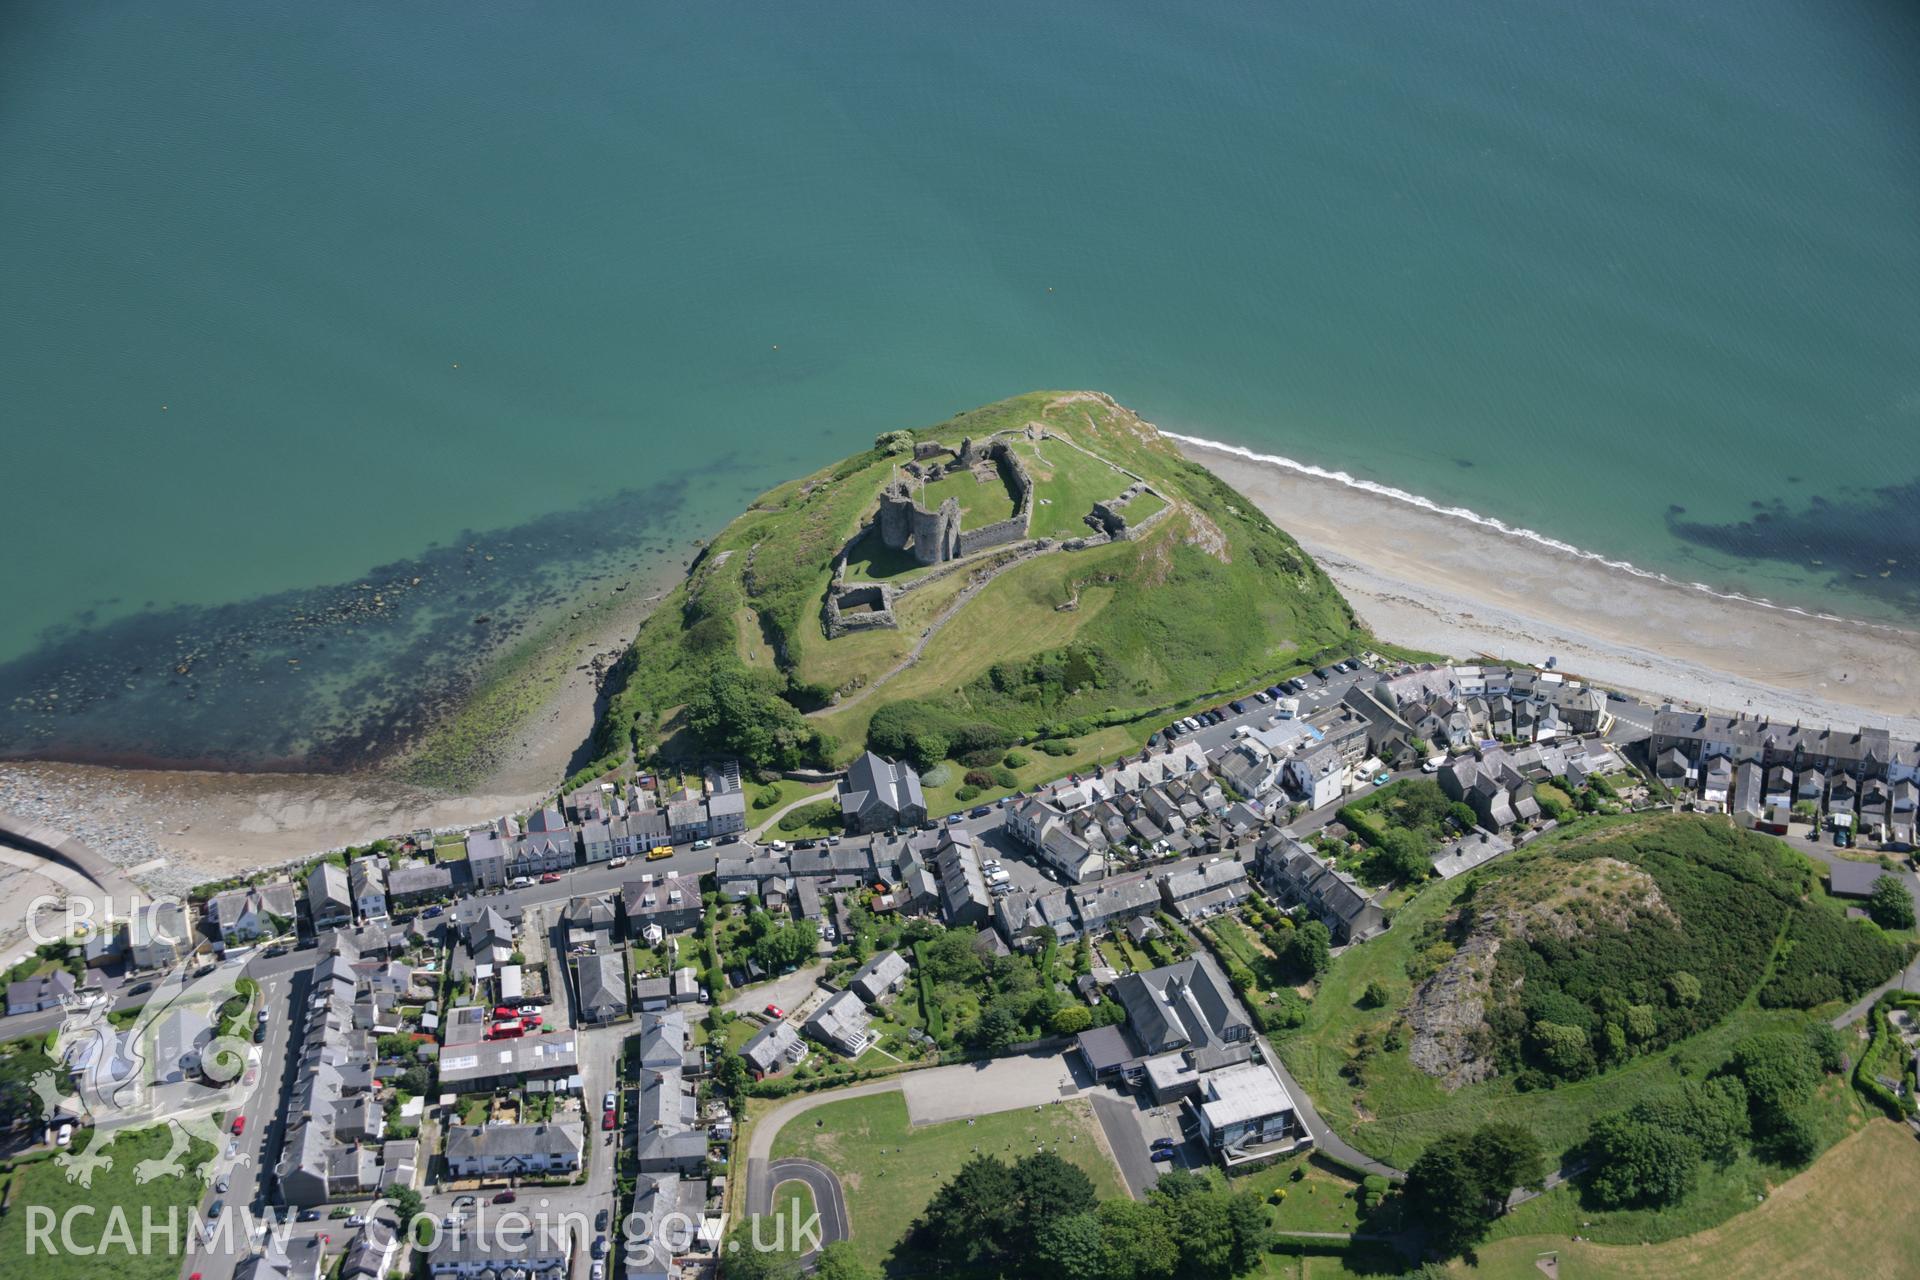 RCAHMW colour oblique aerial photograph of Criccieth Castle from the north. Taken on 14 June 2006 by Toby Driver.